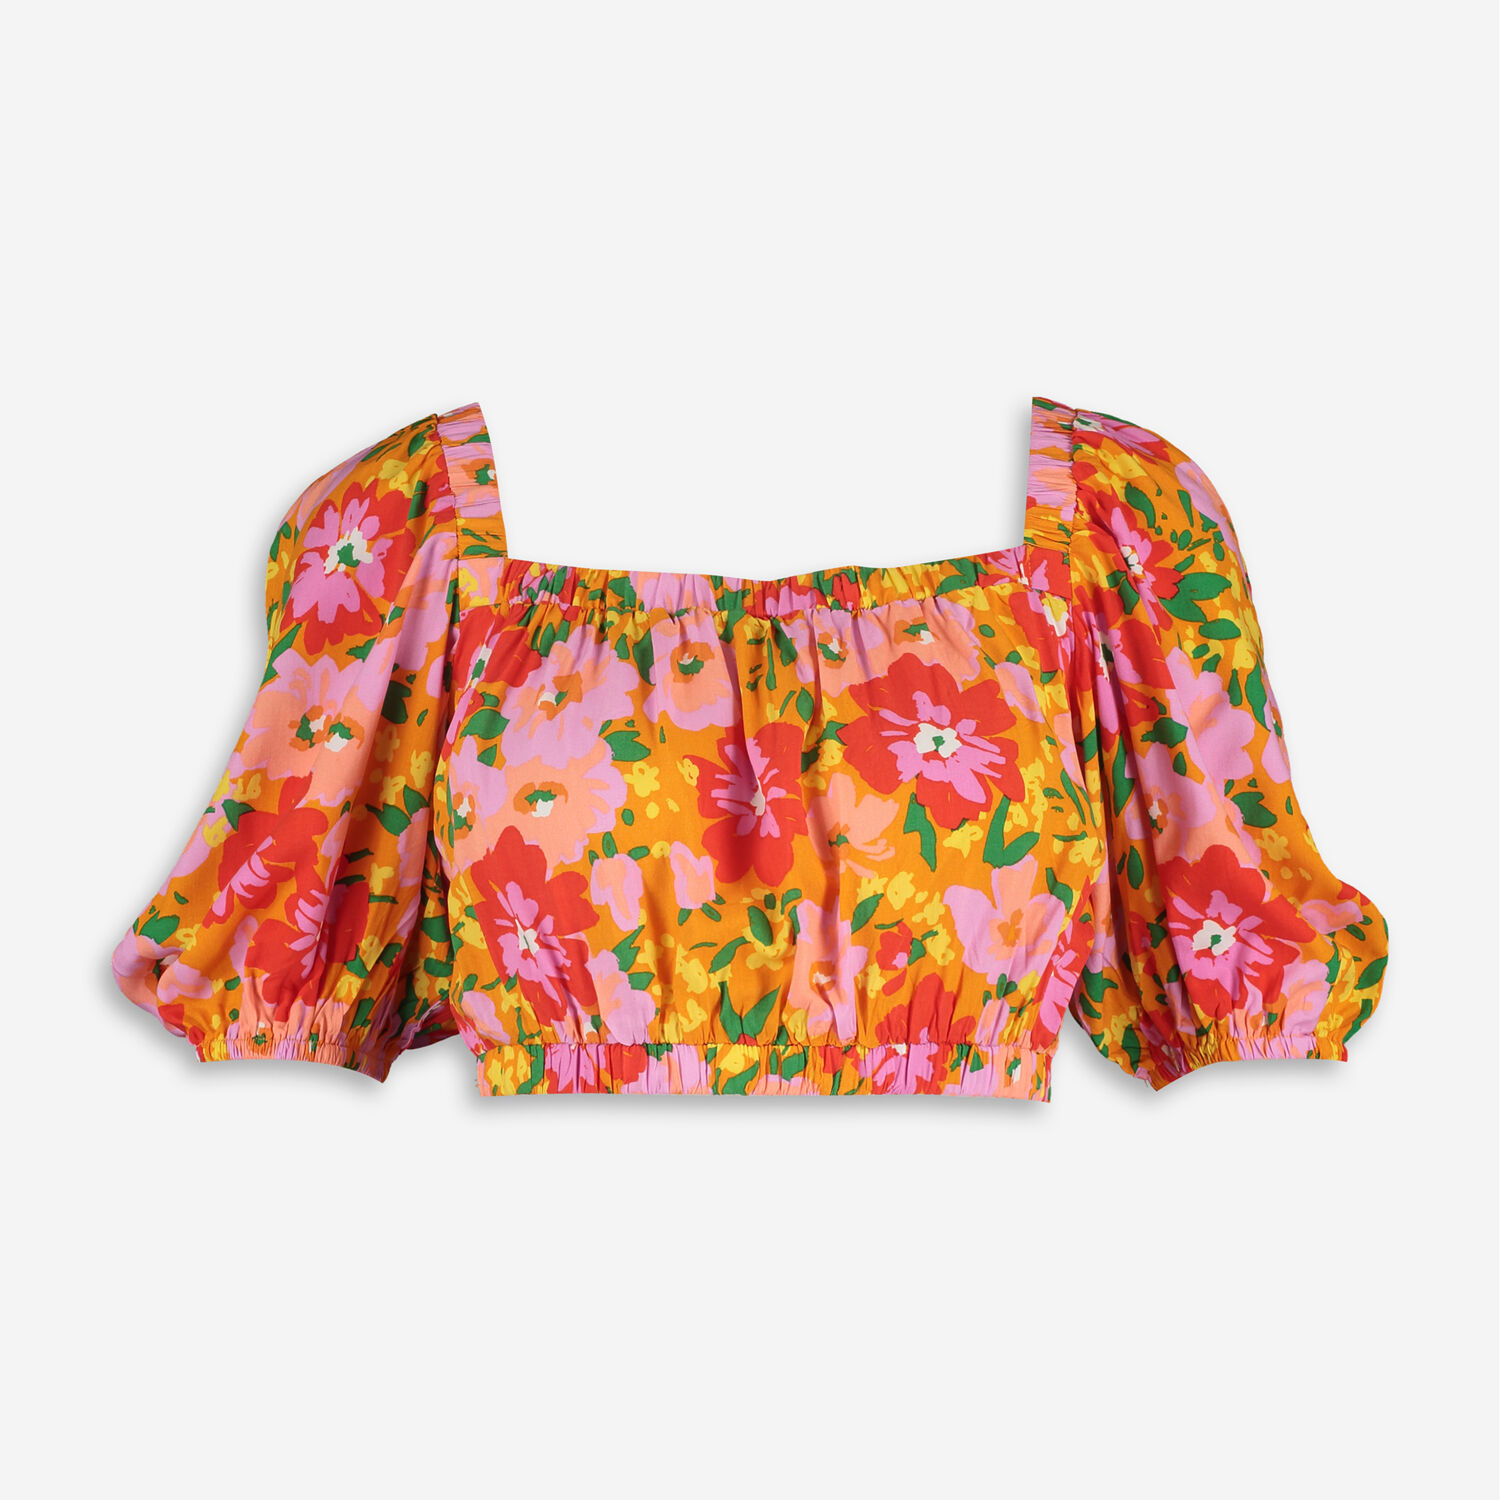 Pink Floral Cropped Top - TK Maxx UK